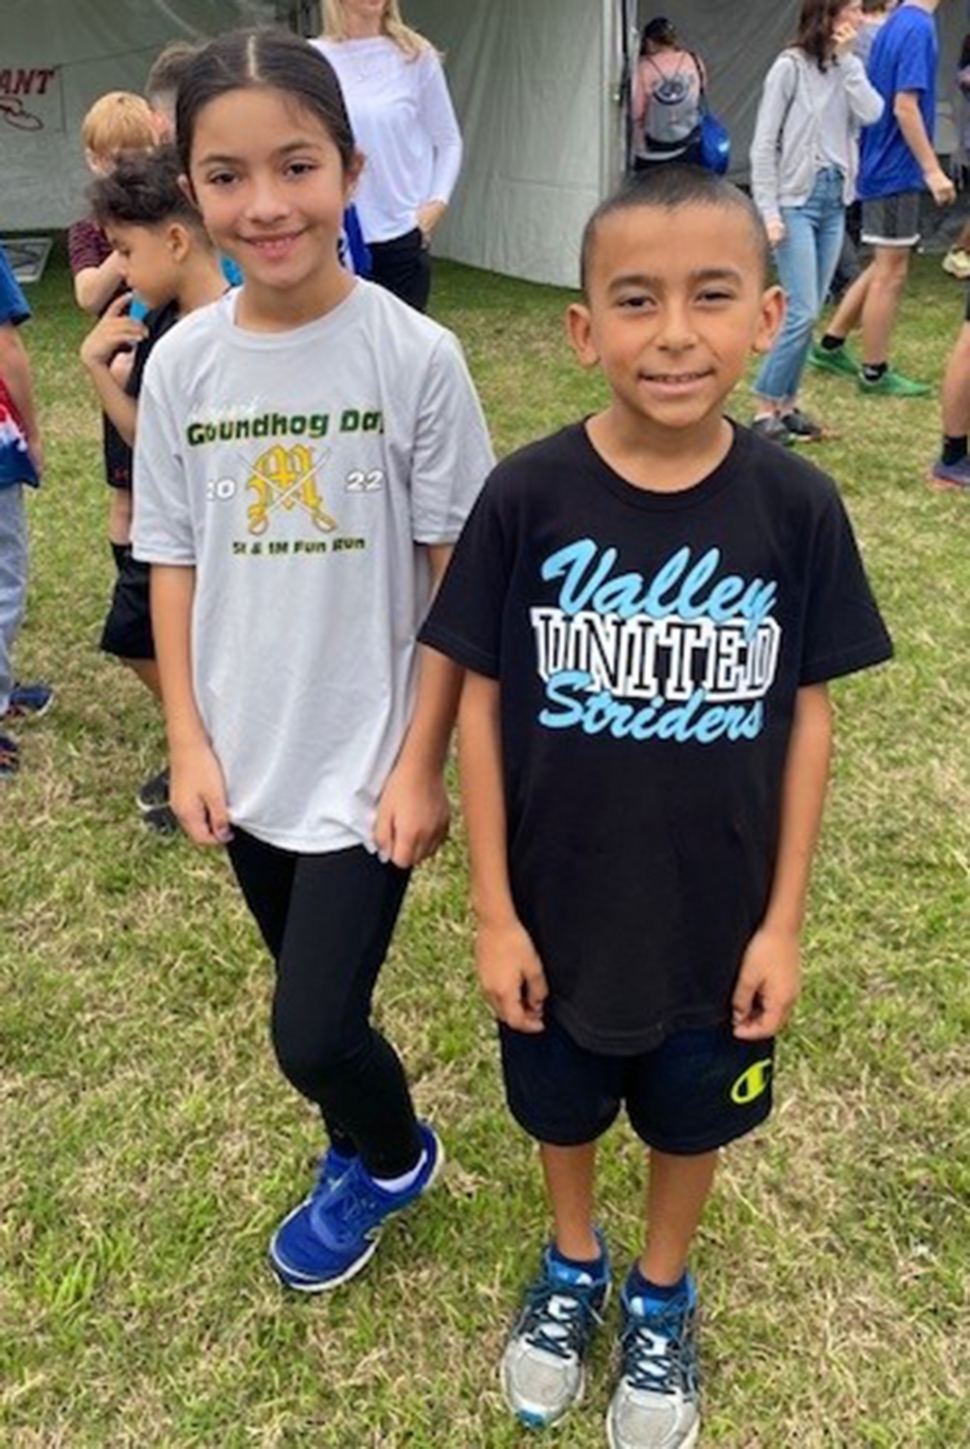 Pictured above is Brooklyn Limon who placed 43rd out of 189 in the Girls 7-8, and Jacob Ramirez, first time runner who placed 131st out 219 in the Boys 7-8 Division. 